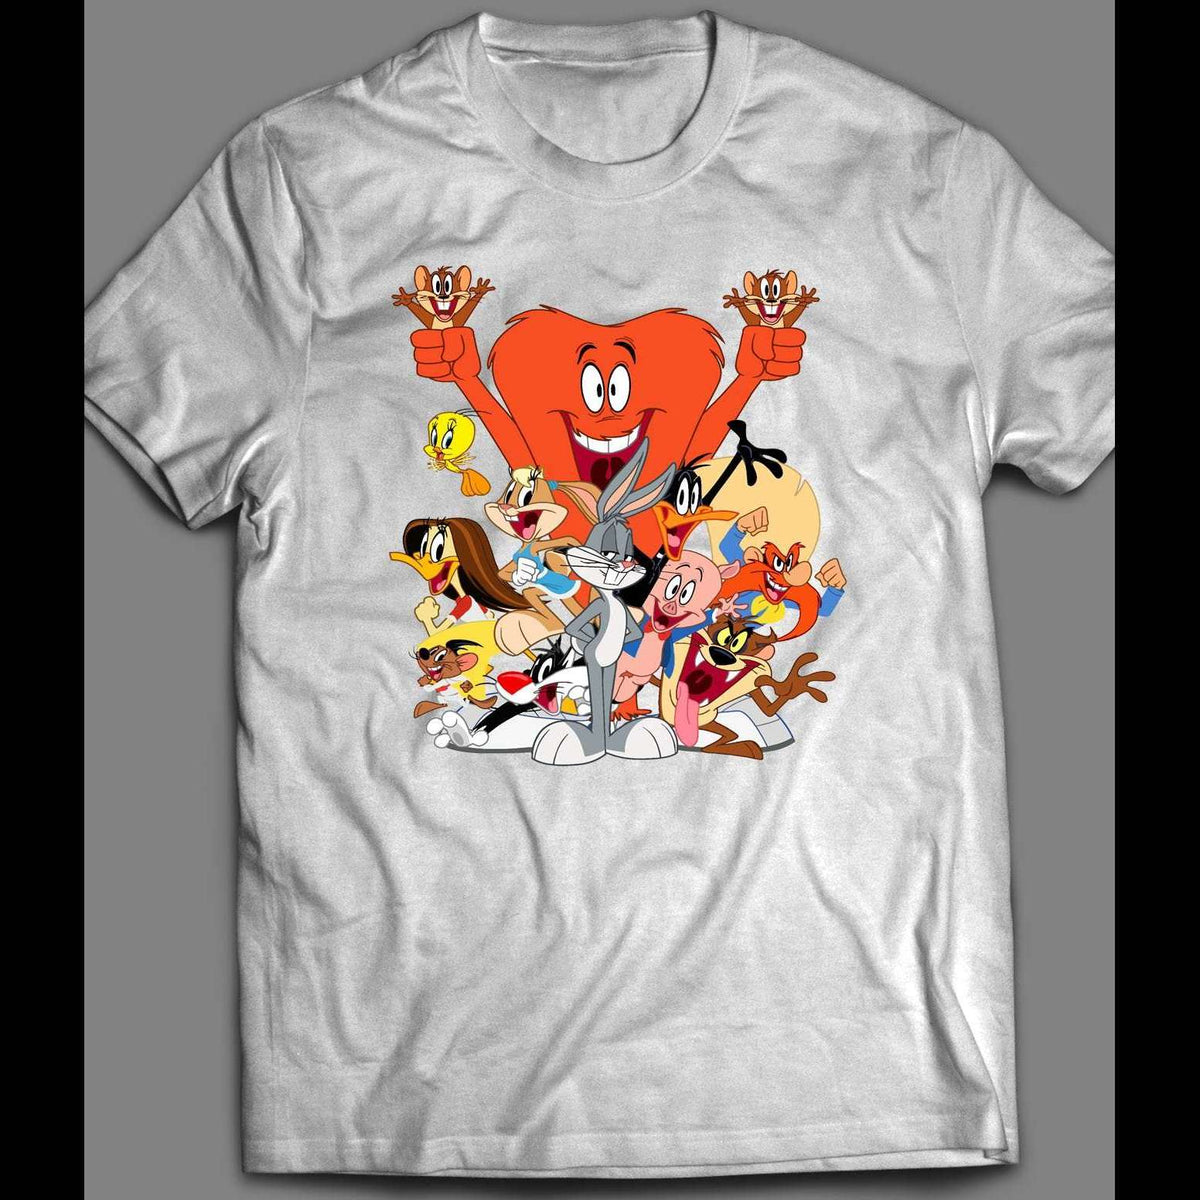 OLDSKOOL LOONEY CARTOON CHARACTERS CUSTOM T-SHIRT | 80's, 90's to Today Quality ...1200 x 1200